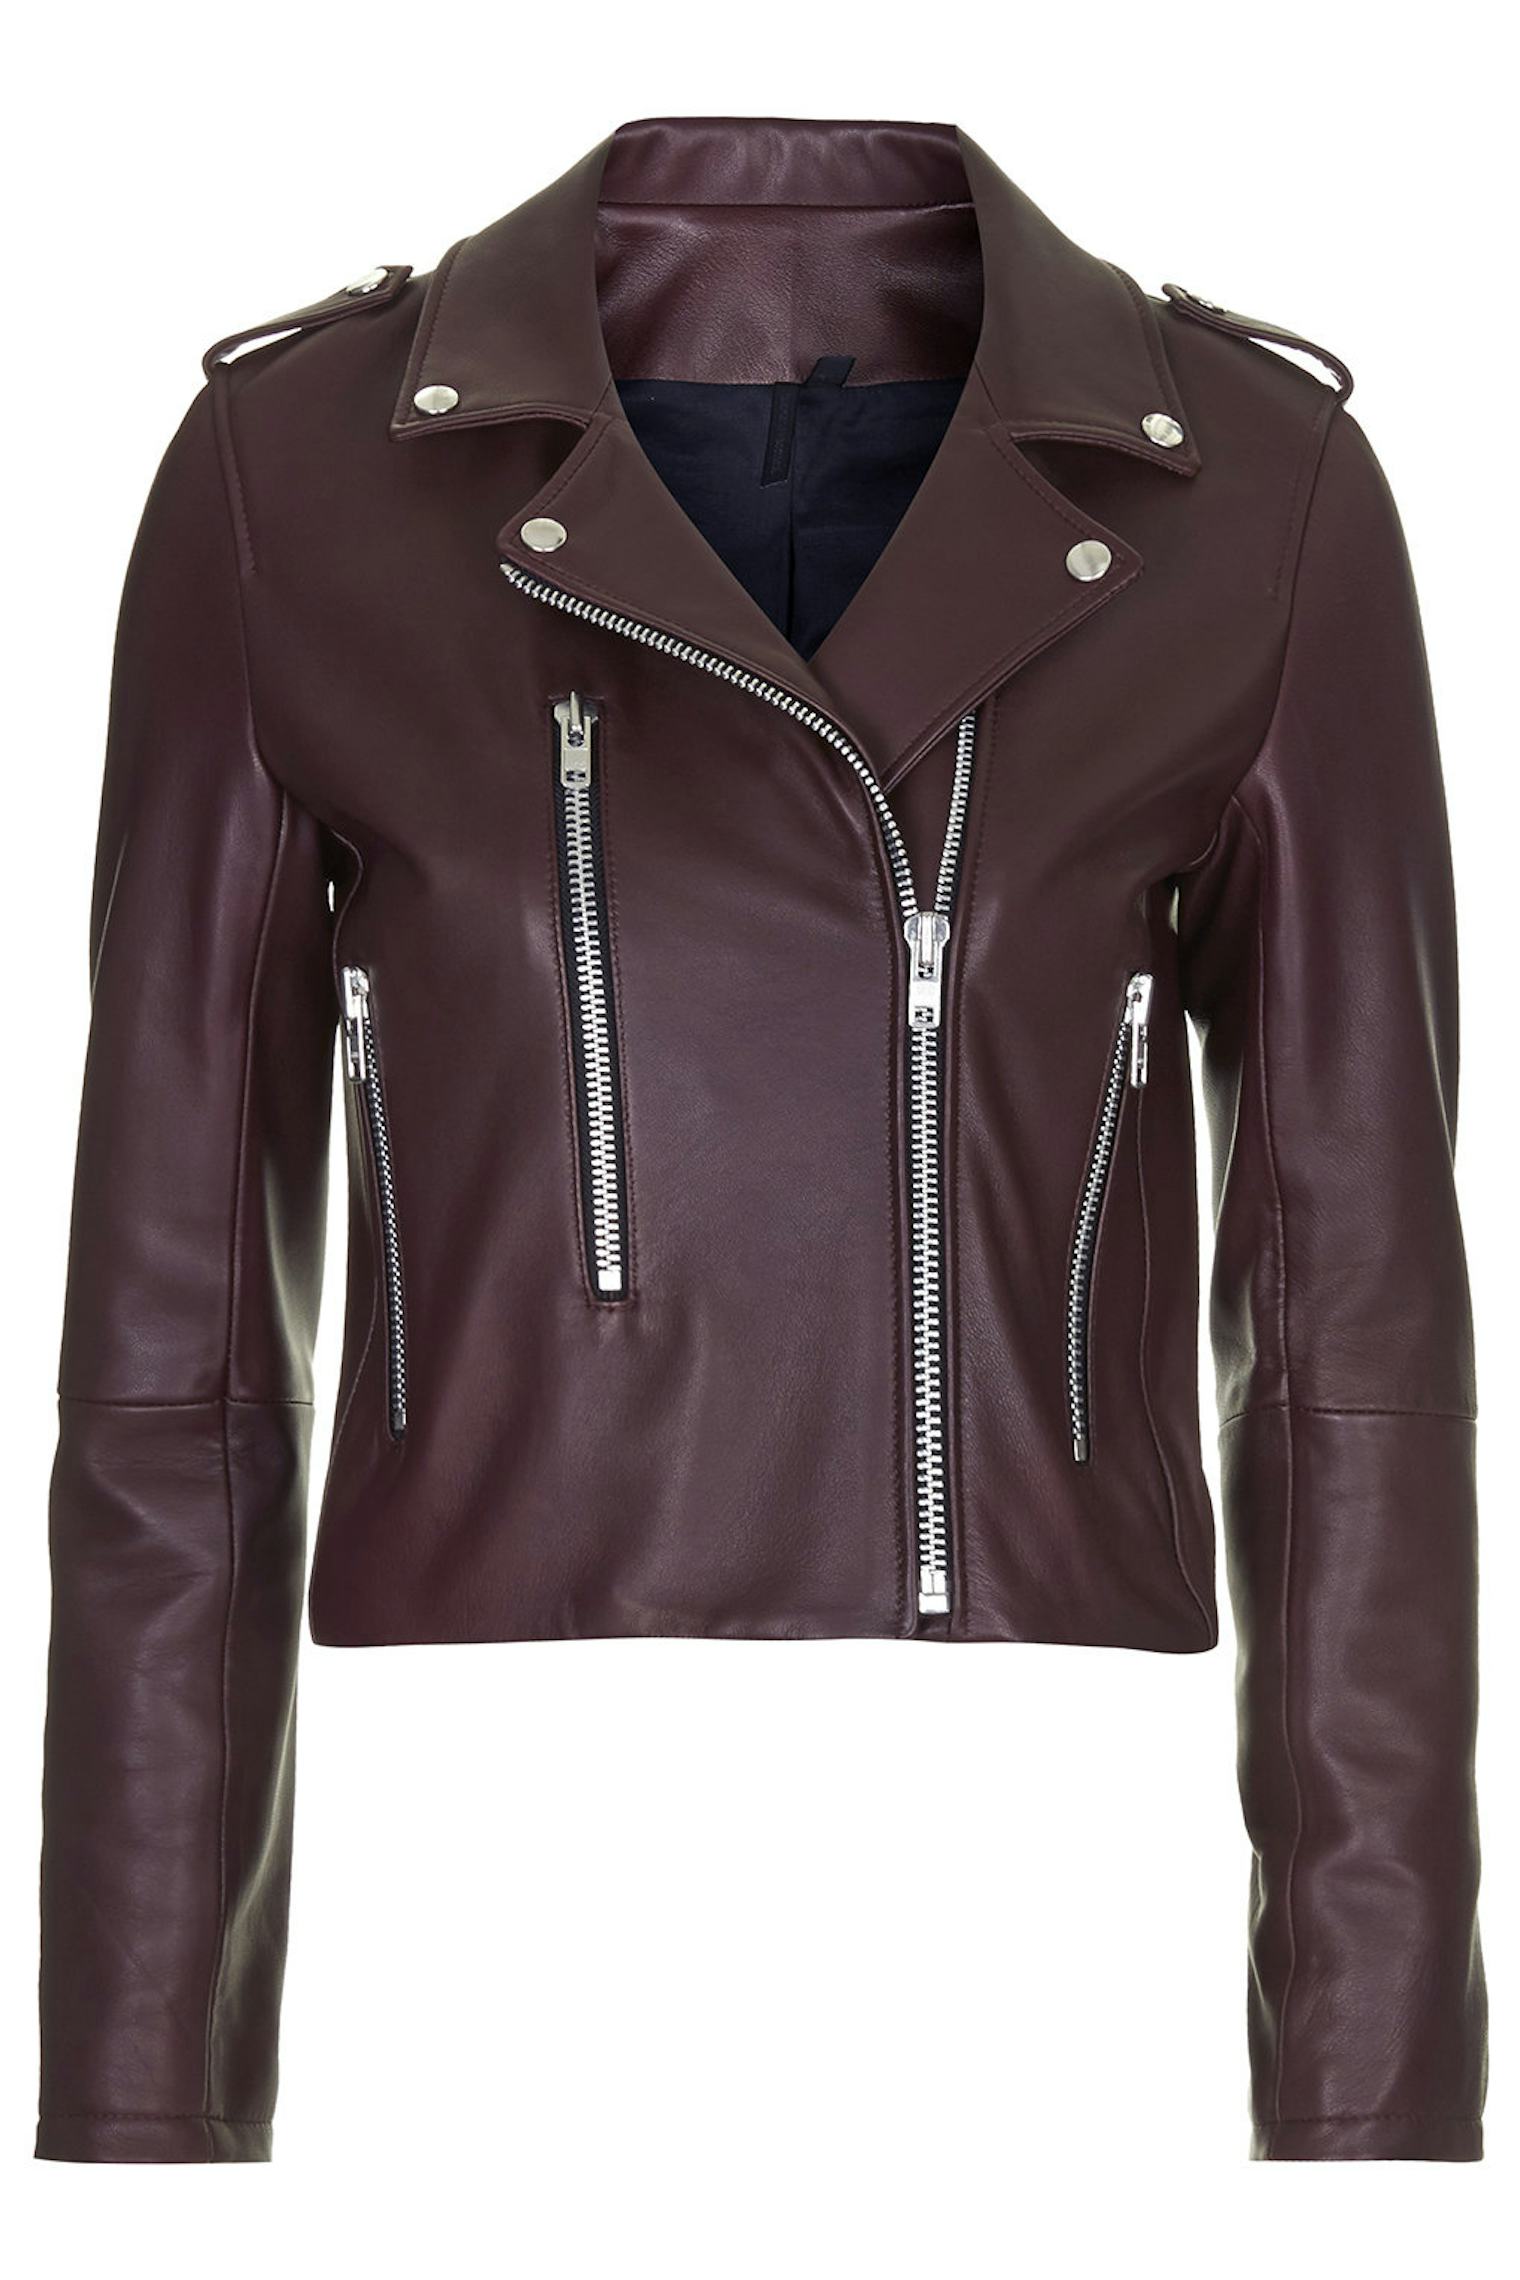 The Best Leather Motorcycle Jackets